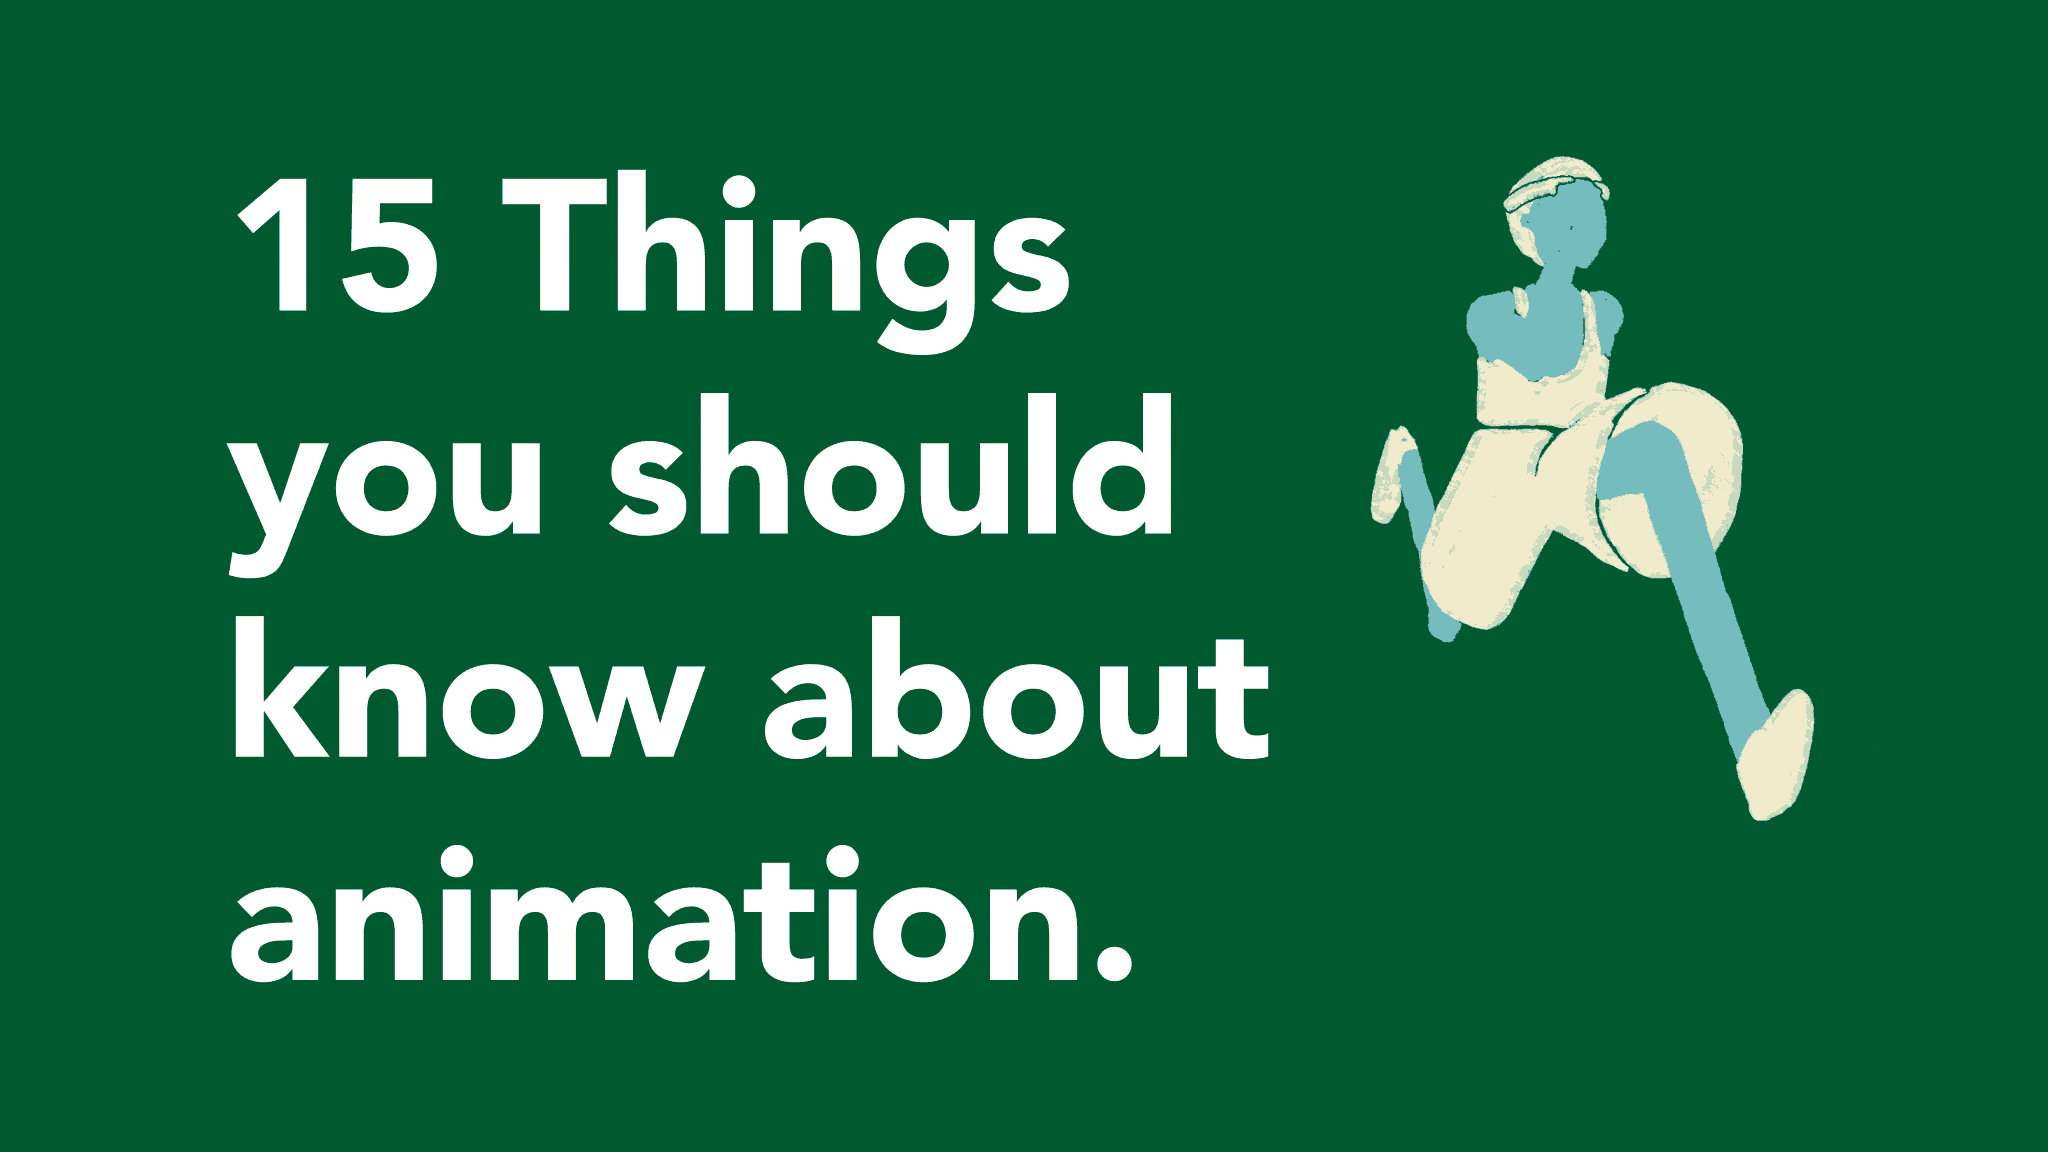 15 THINGS YOU SHOULD KNOW ABOUT ANIMATION